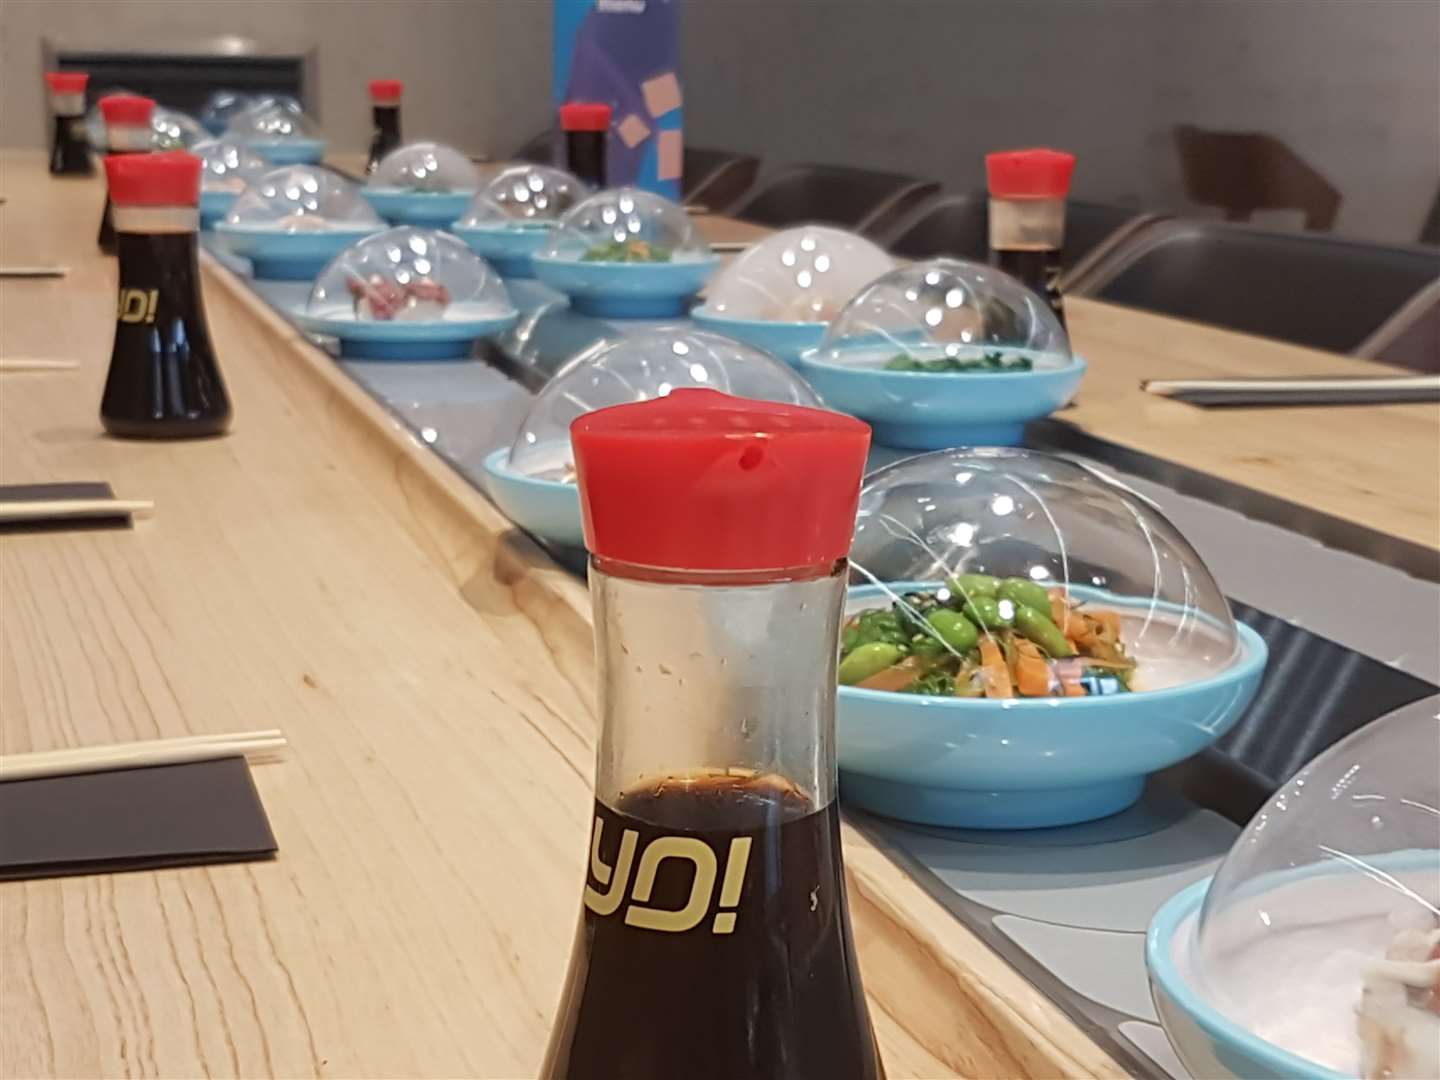 Ashford Designer Outlet's new YO! Sushi franchise is sure to impress any customers